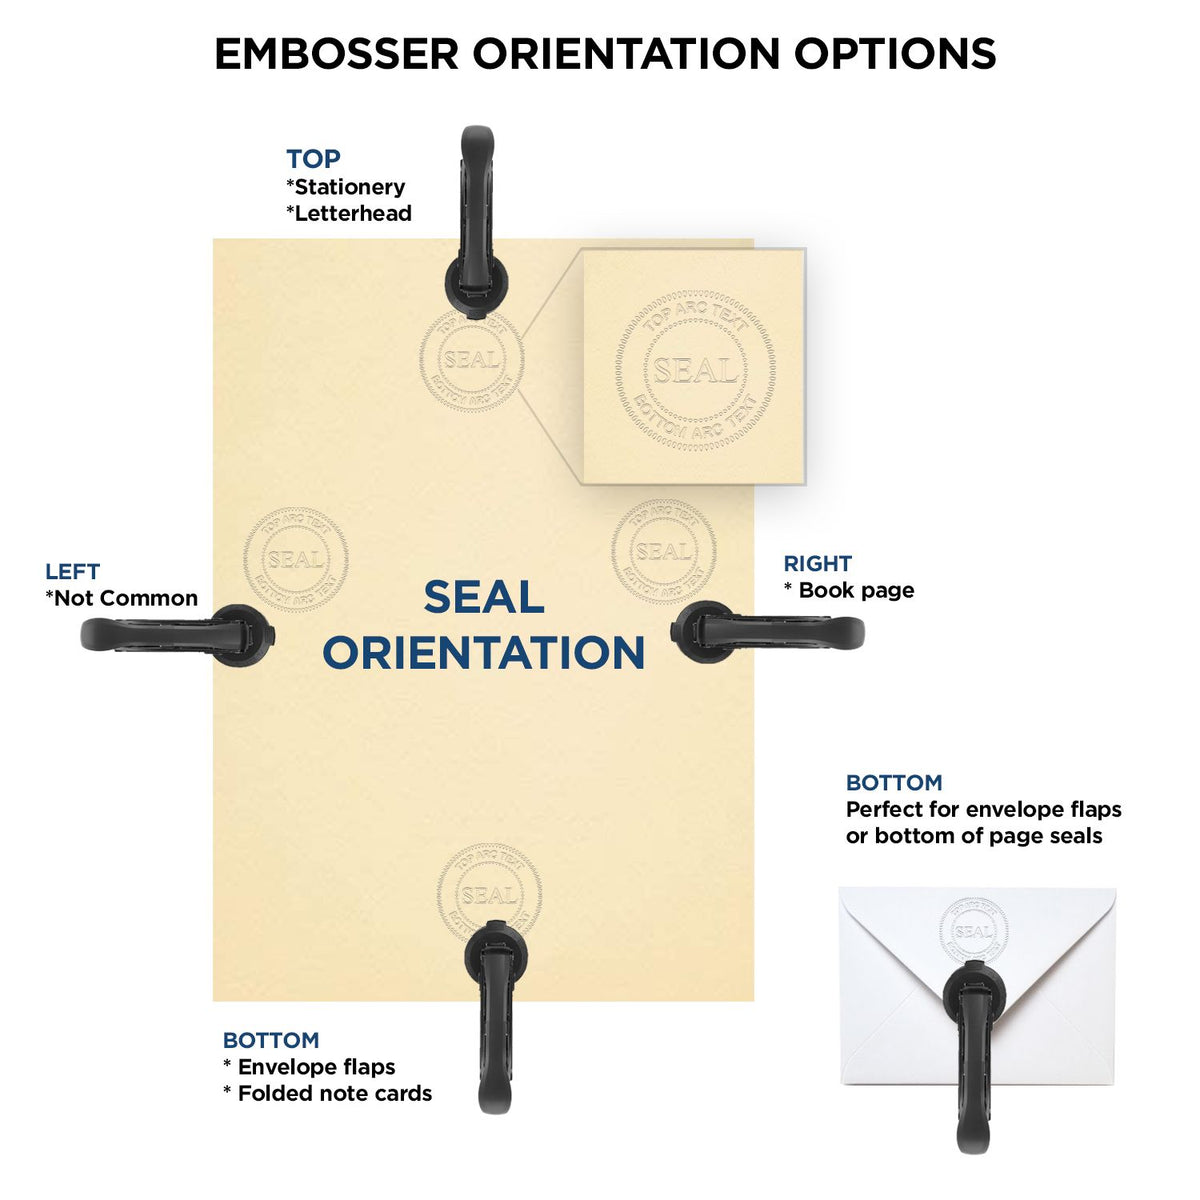 An infographic for the Heavy Duty Cast Iron Pennsylvania Engineer Seal Embosser showing embosser orientation, this is showing examples of a top, bottom, right and left insert.